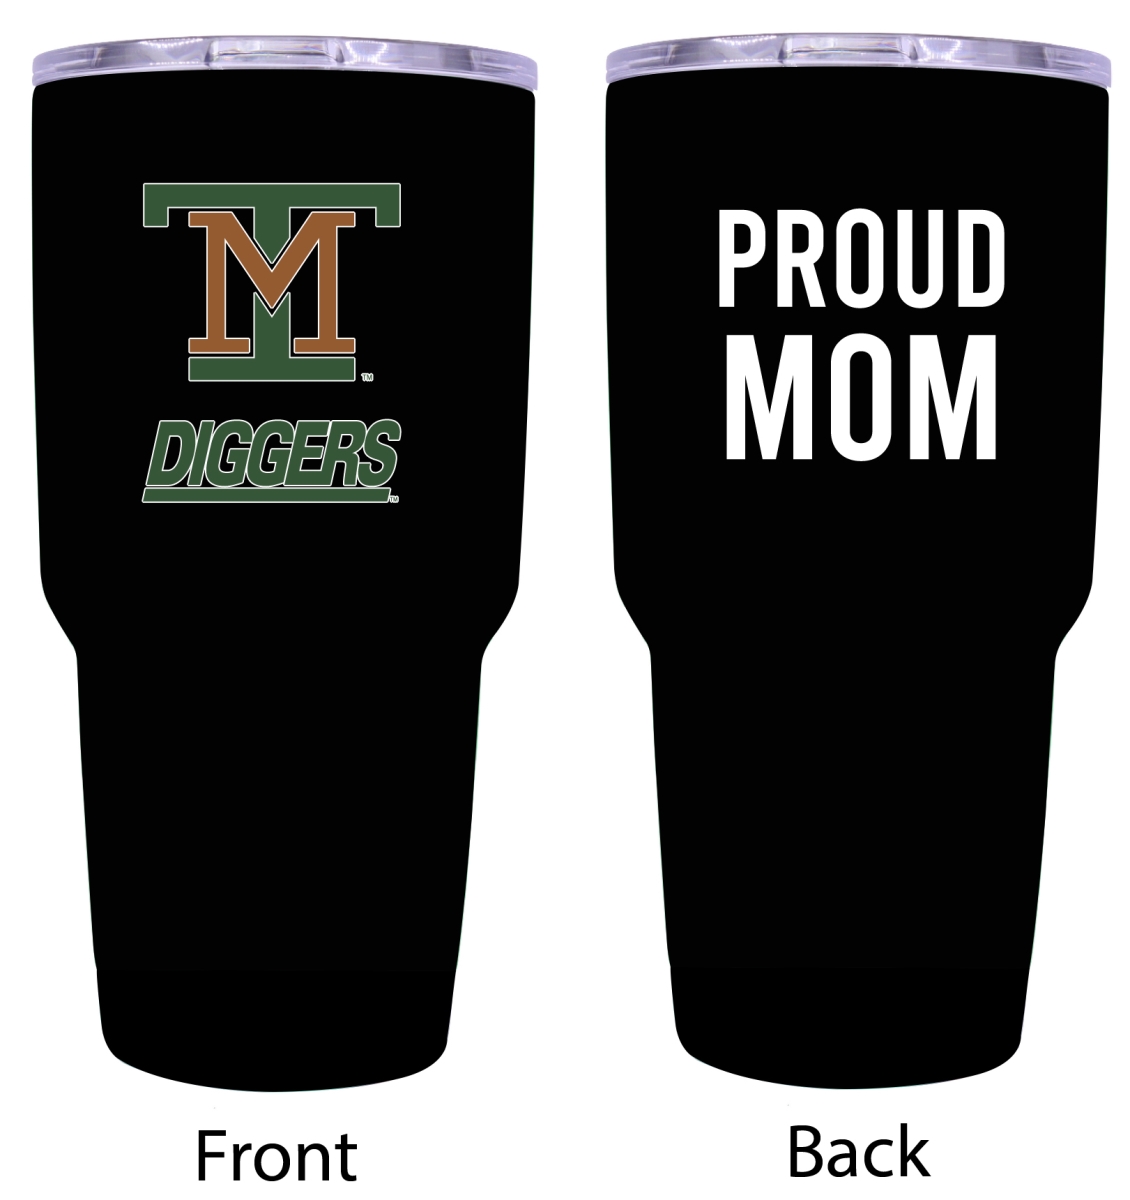 Picture of R & R Imports ITB-C-MONT20 MOM Montana Tech Proud Mom 20 oz Insulated Stainless Steel Tumblers